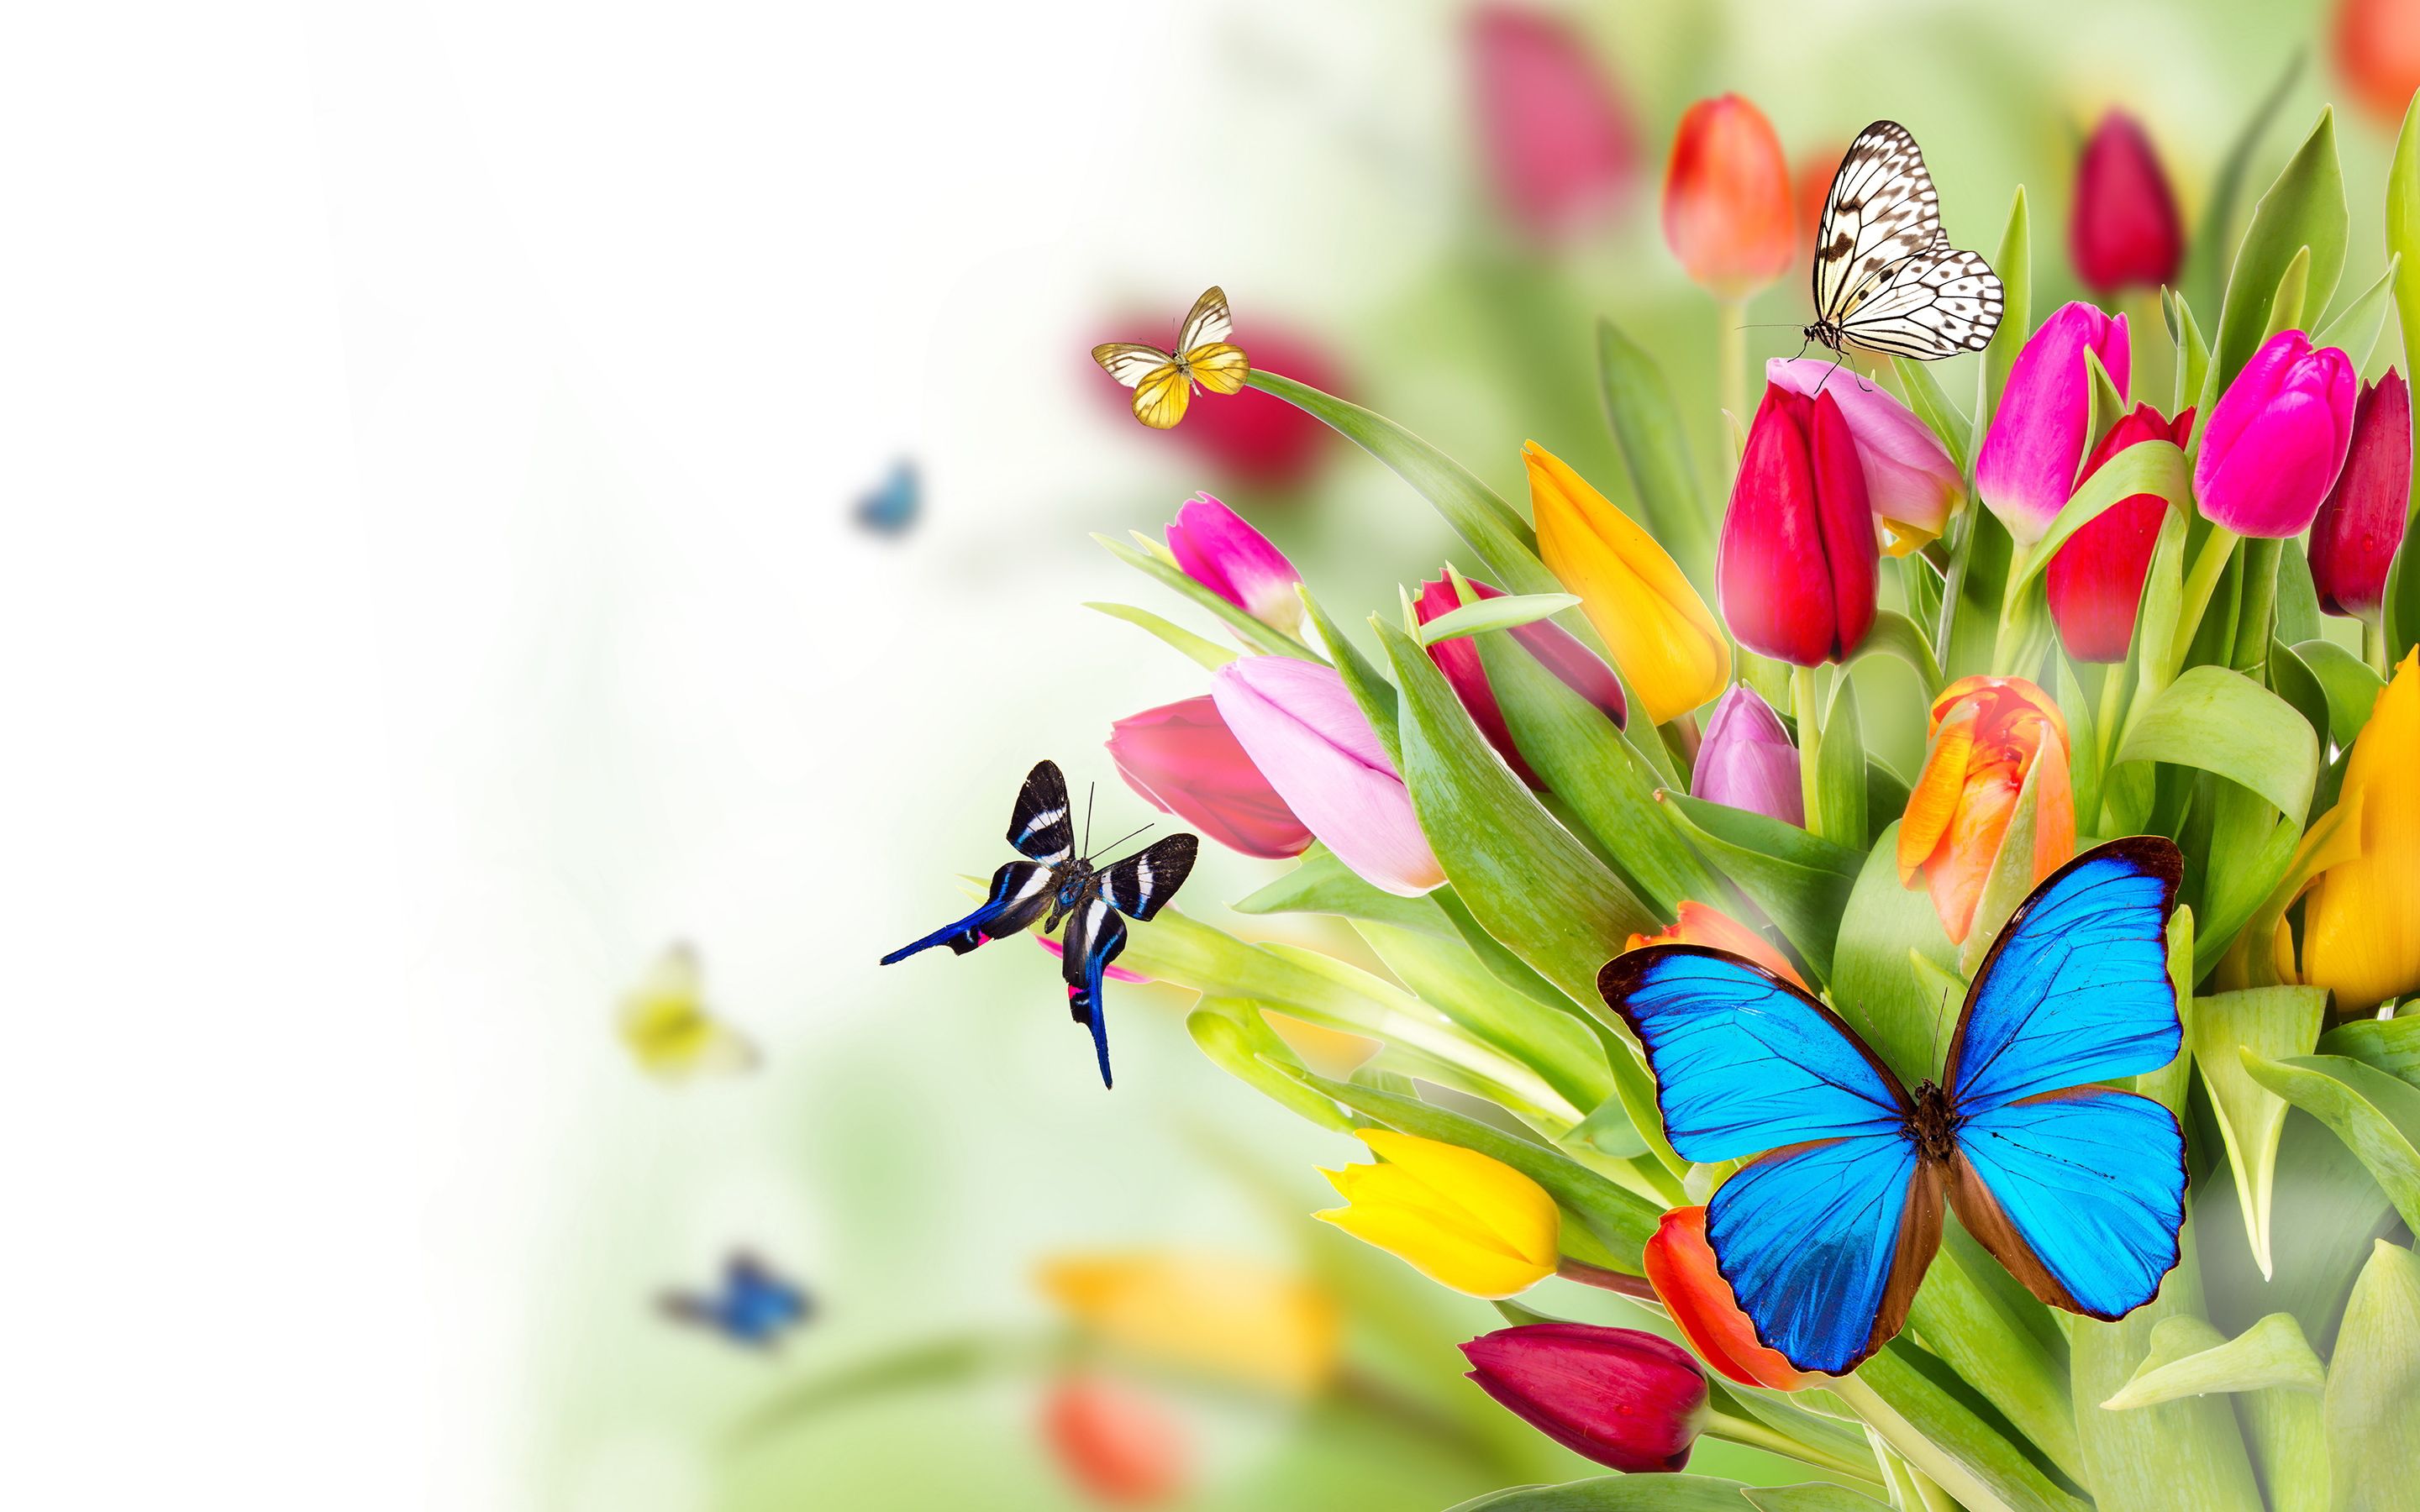 Butterfly Backgrounds | Flowers butterflies Wallpapers Pictures ...